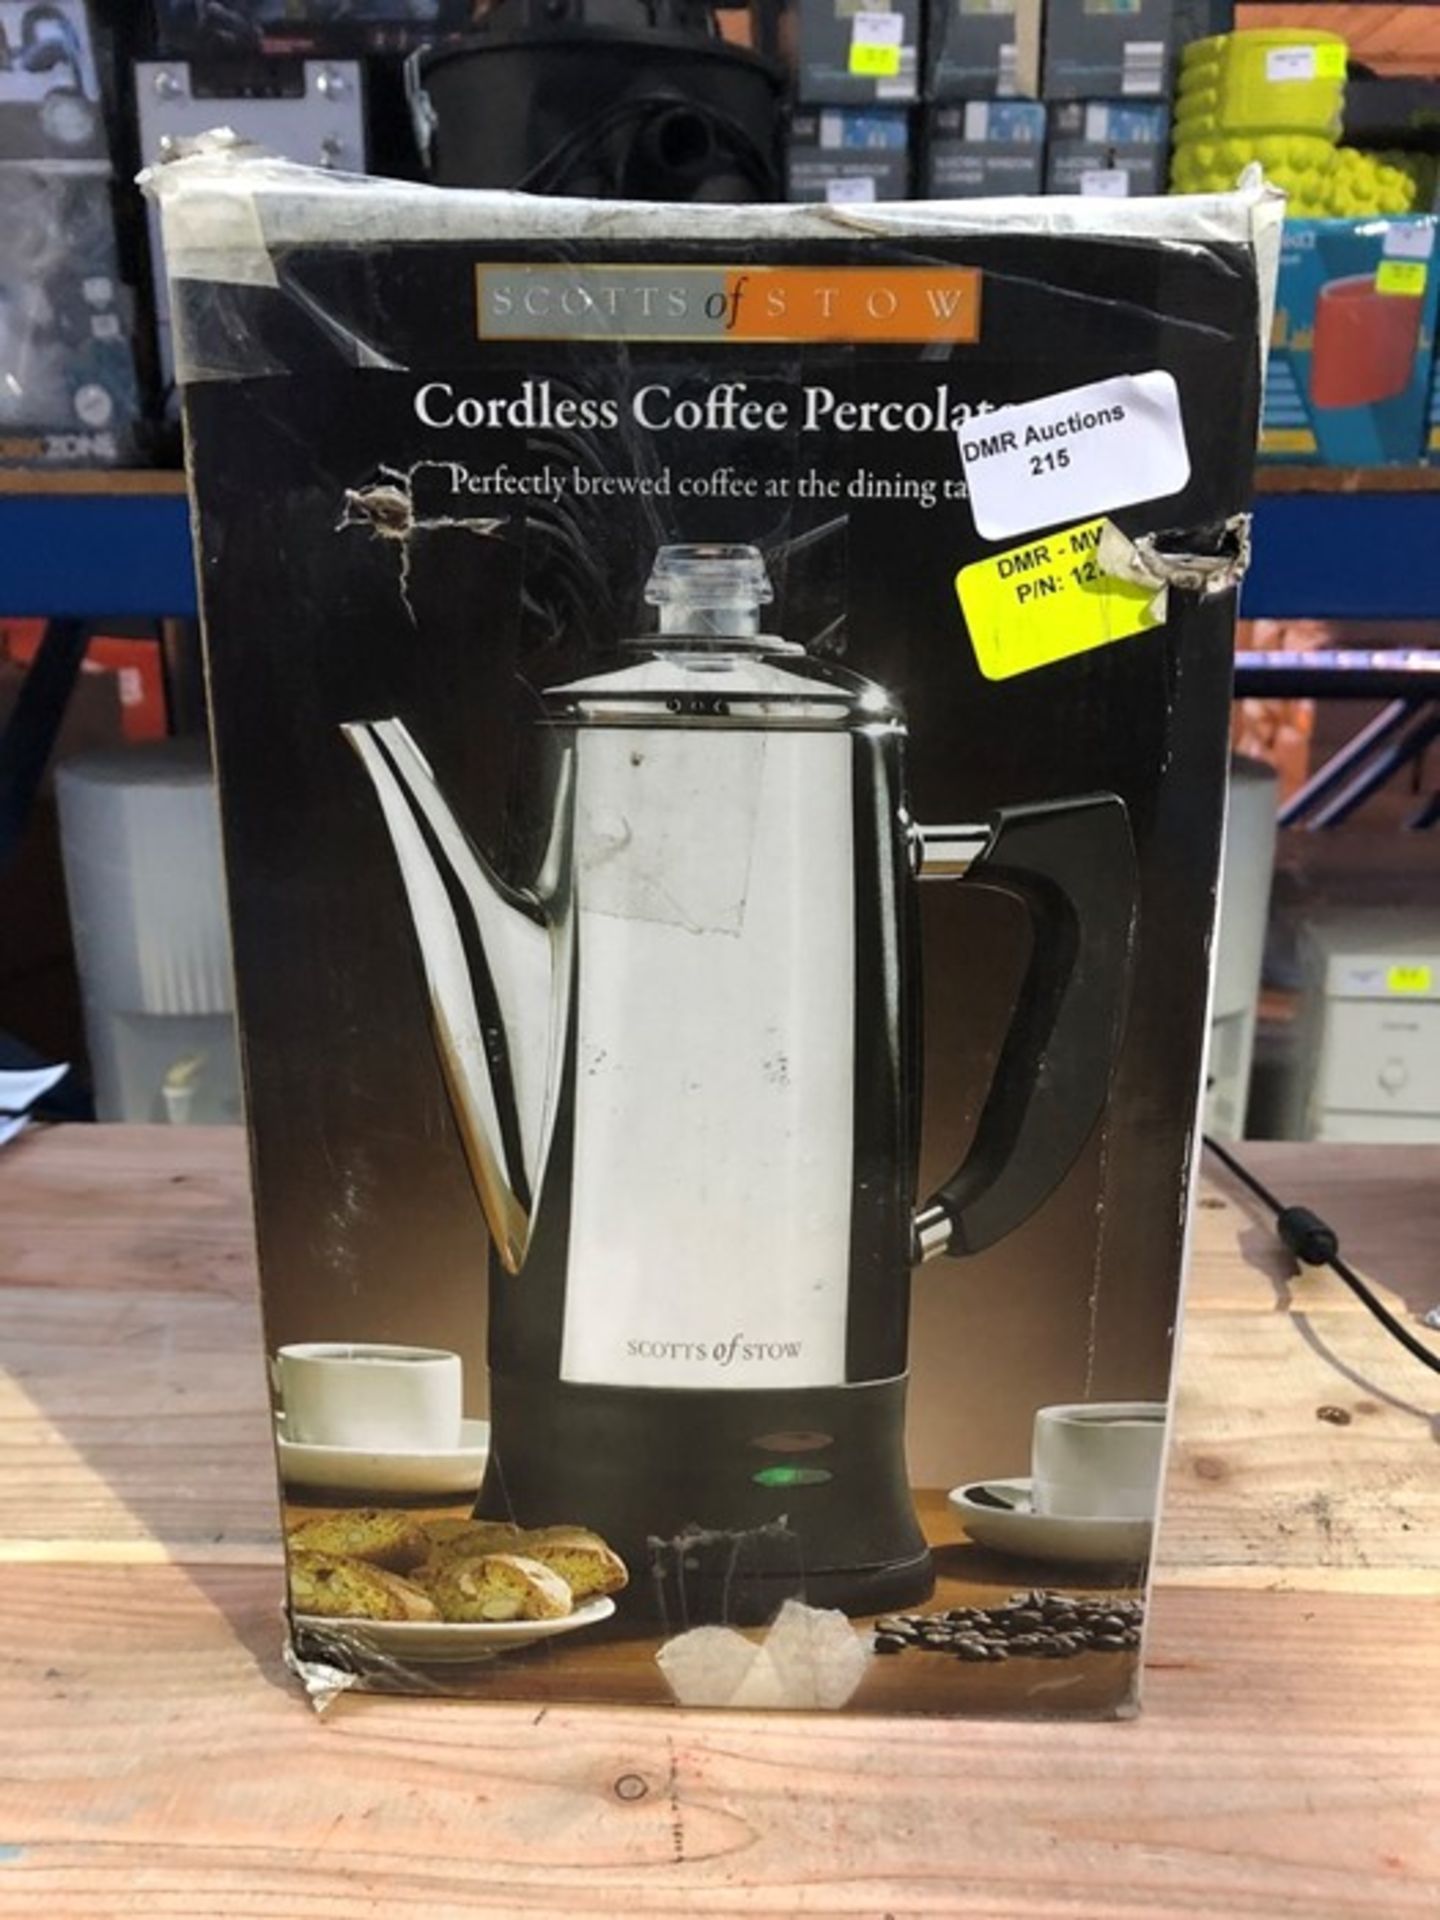 1 BOXED SCOTTS OF STOW CORDLESS COFFEE PERCOLATOR / RRP £39.99 (PUBLIC VIEWING AVAILABLE)